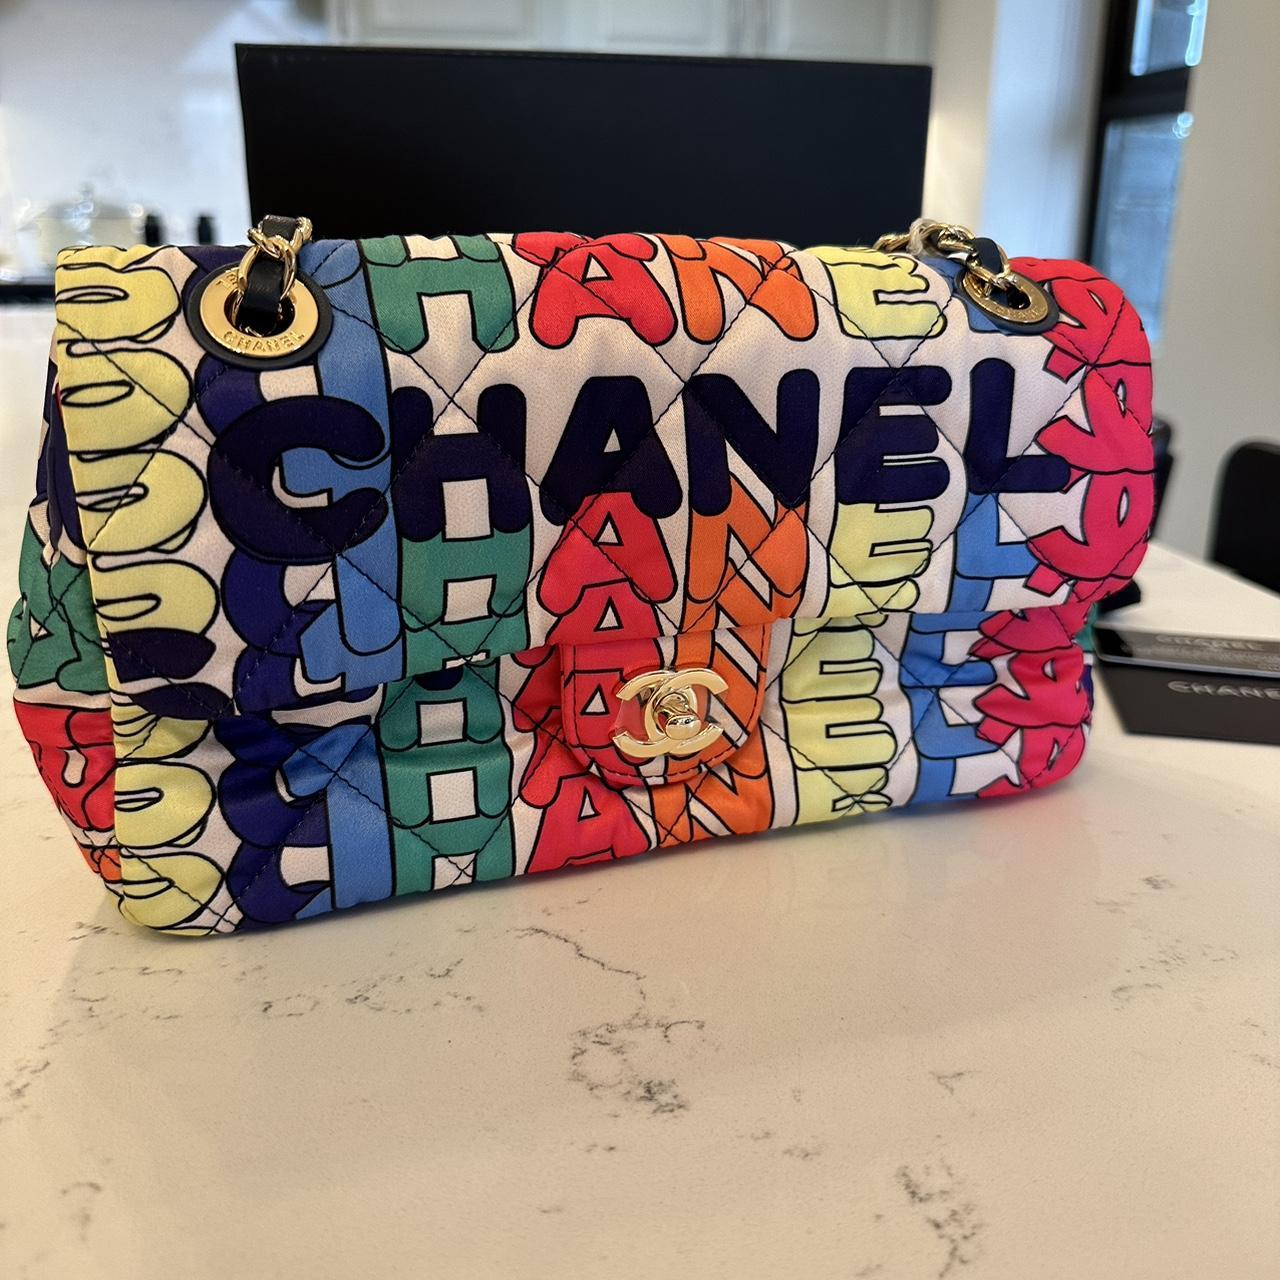 Chanel bag - bought in a market in Singapore. Used... - Depop